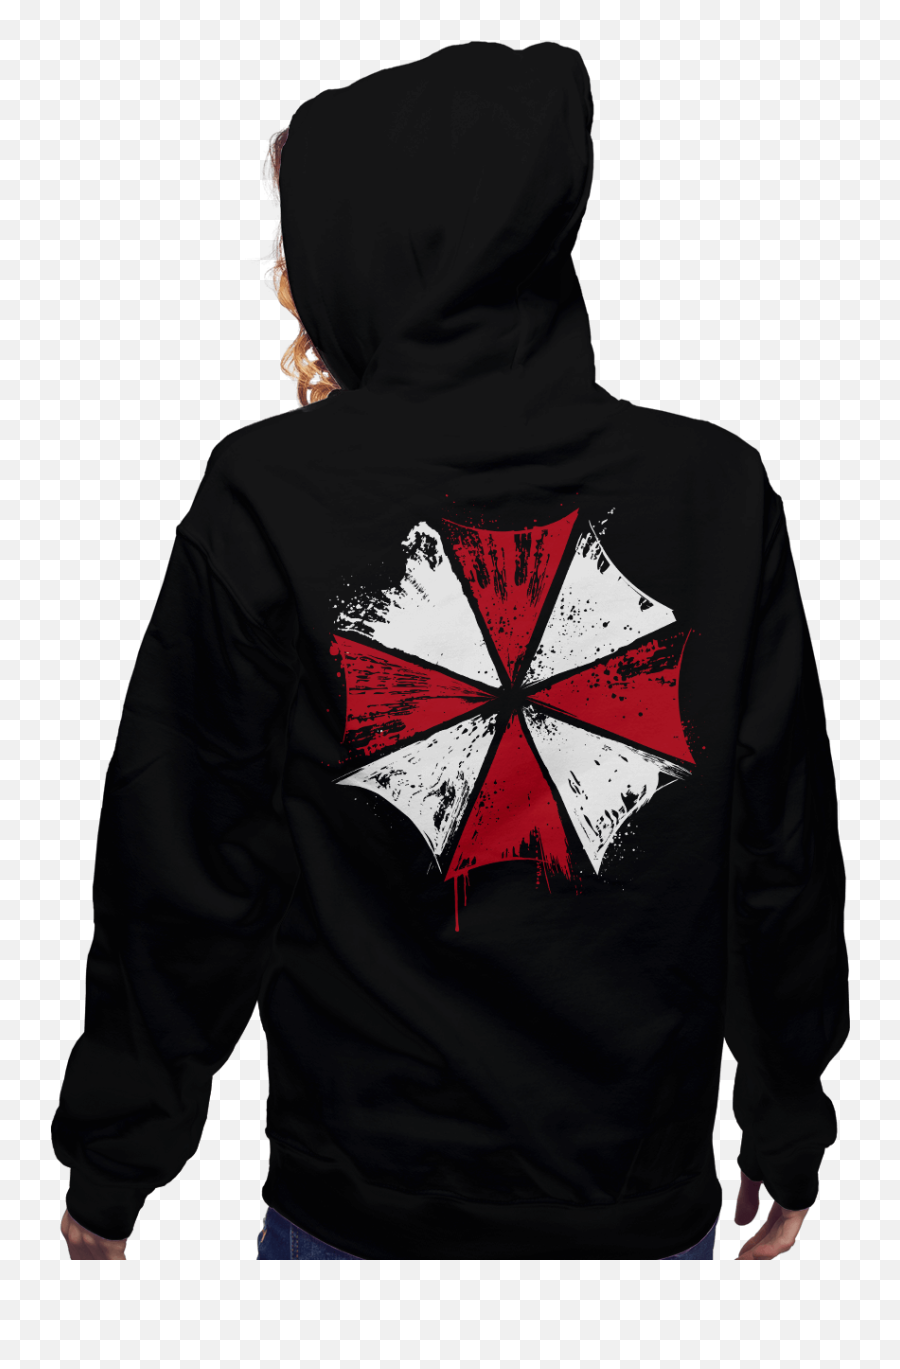 Download Umbrella Corp - Full Size Png Image Pngkit Umbrella Corp,Umbrella Corp Logo